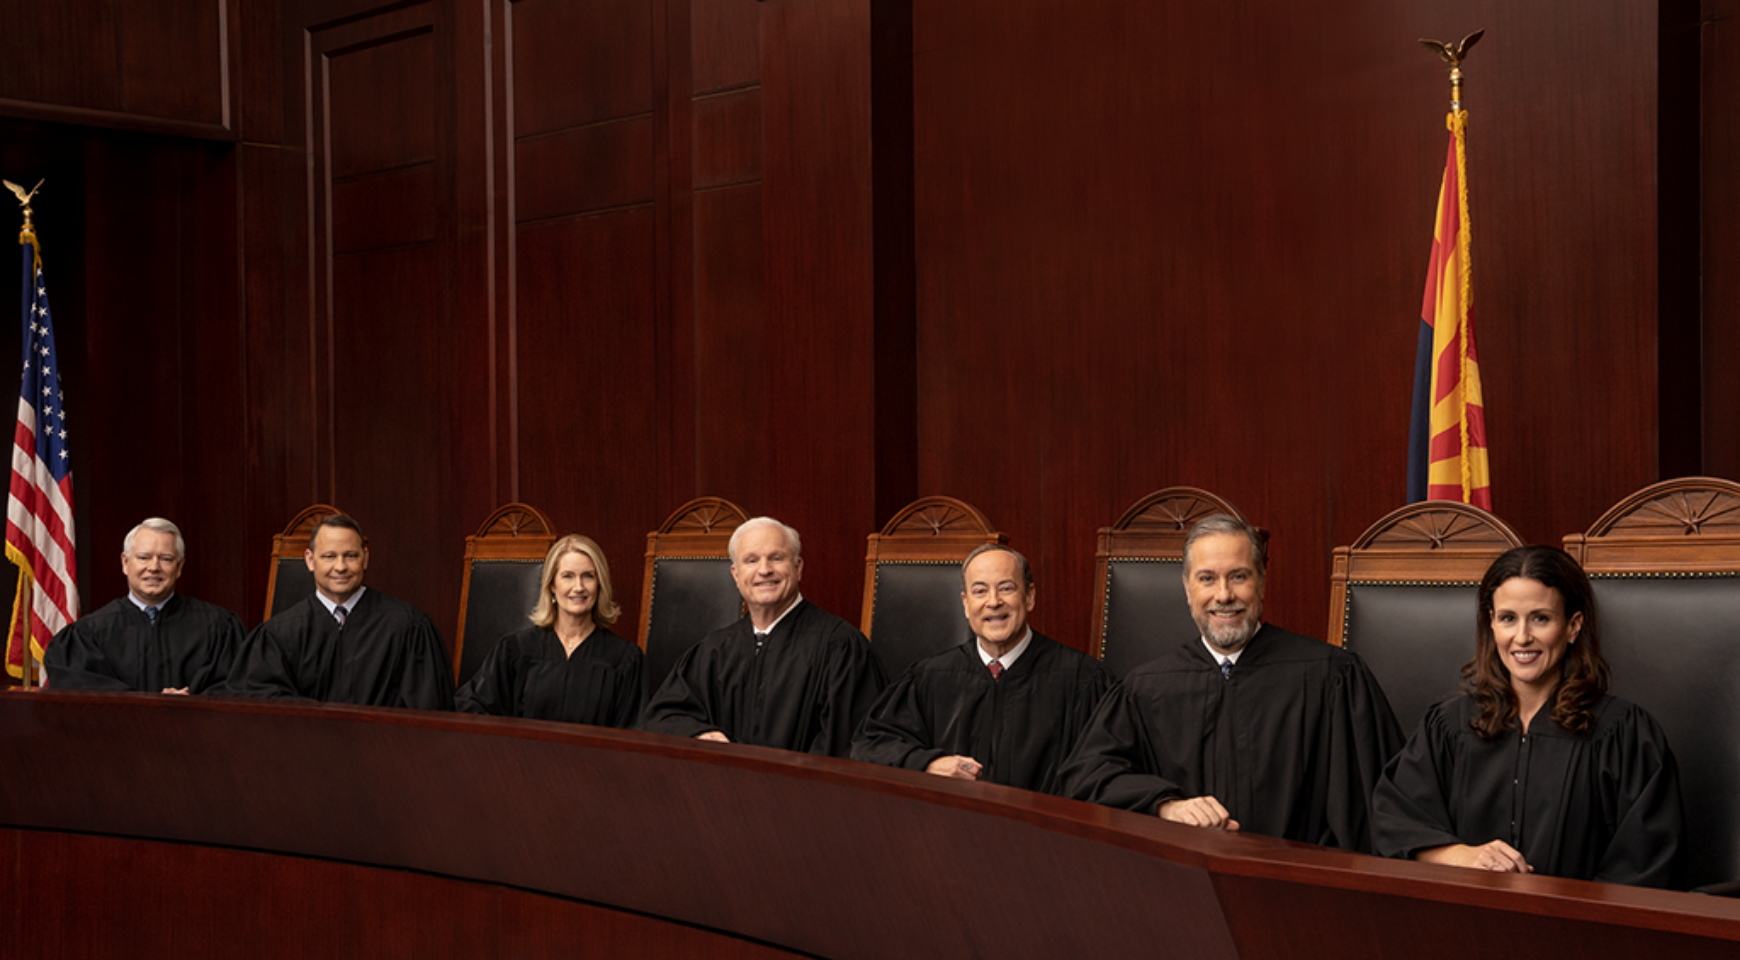 Justices in court room